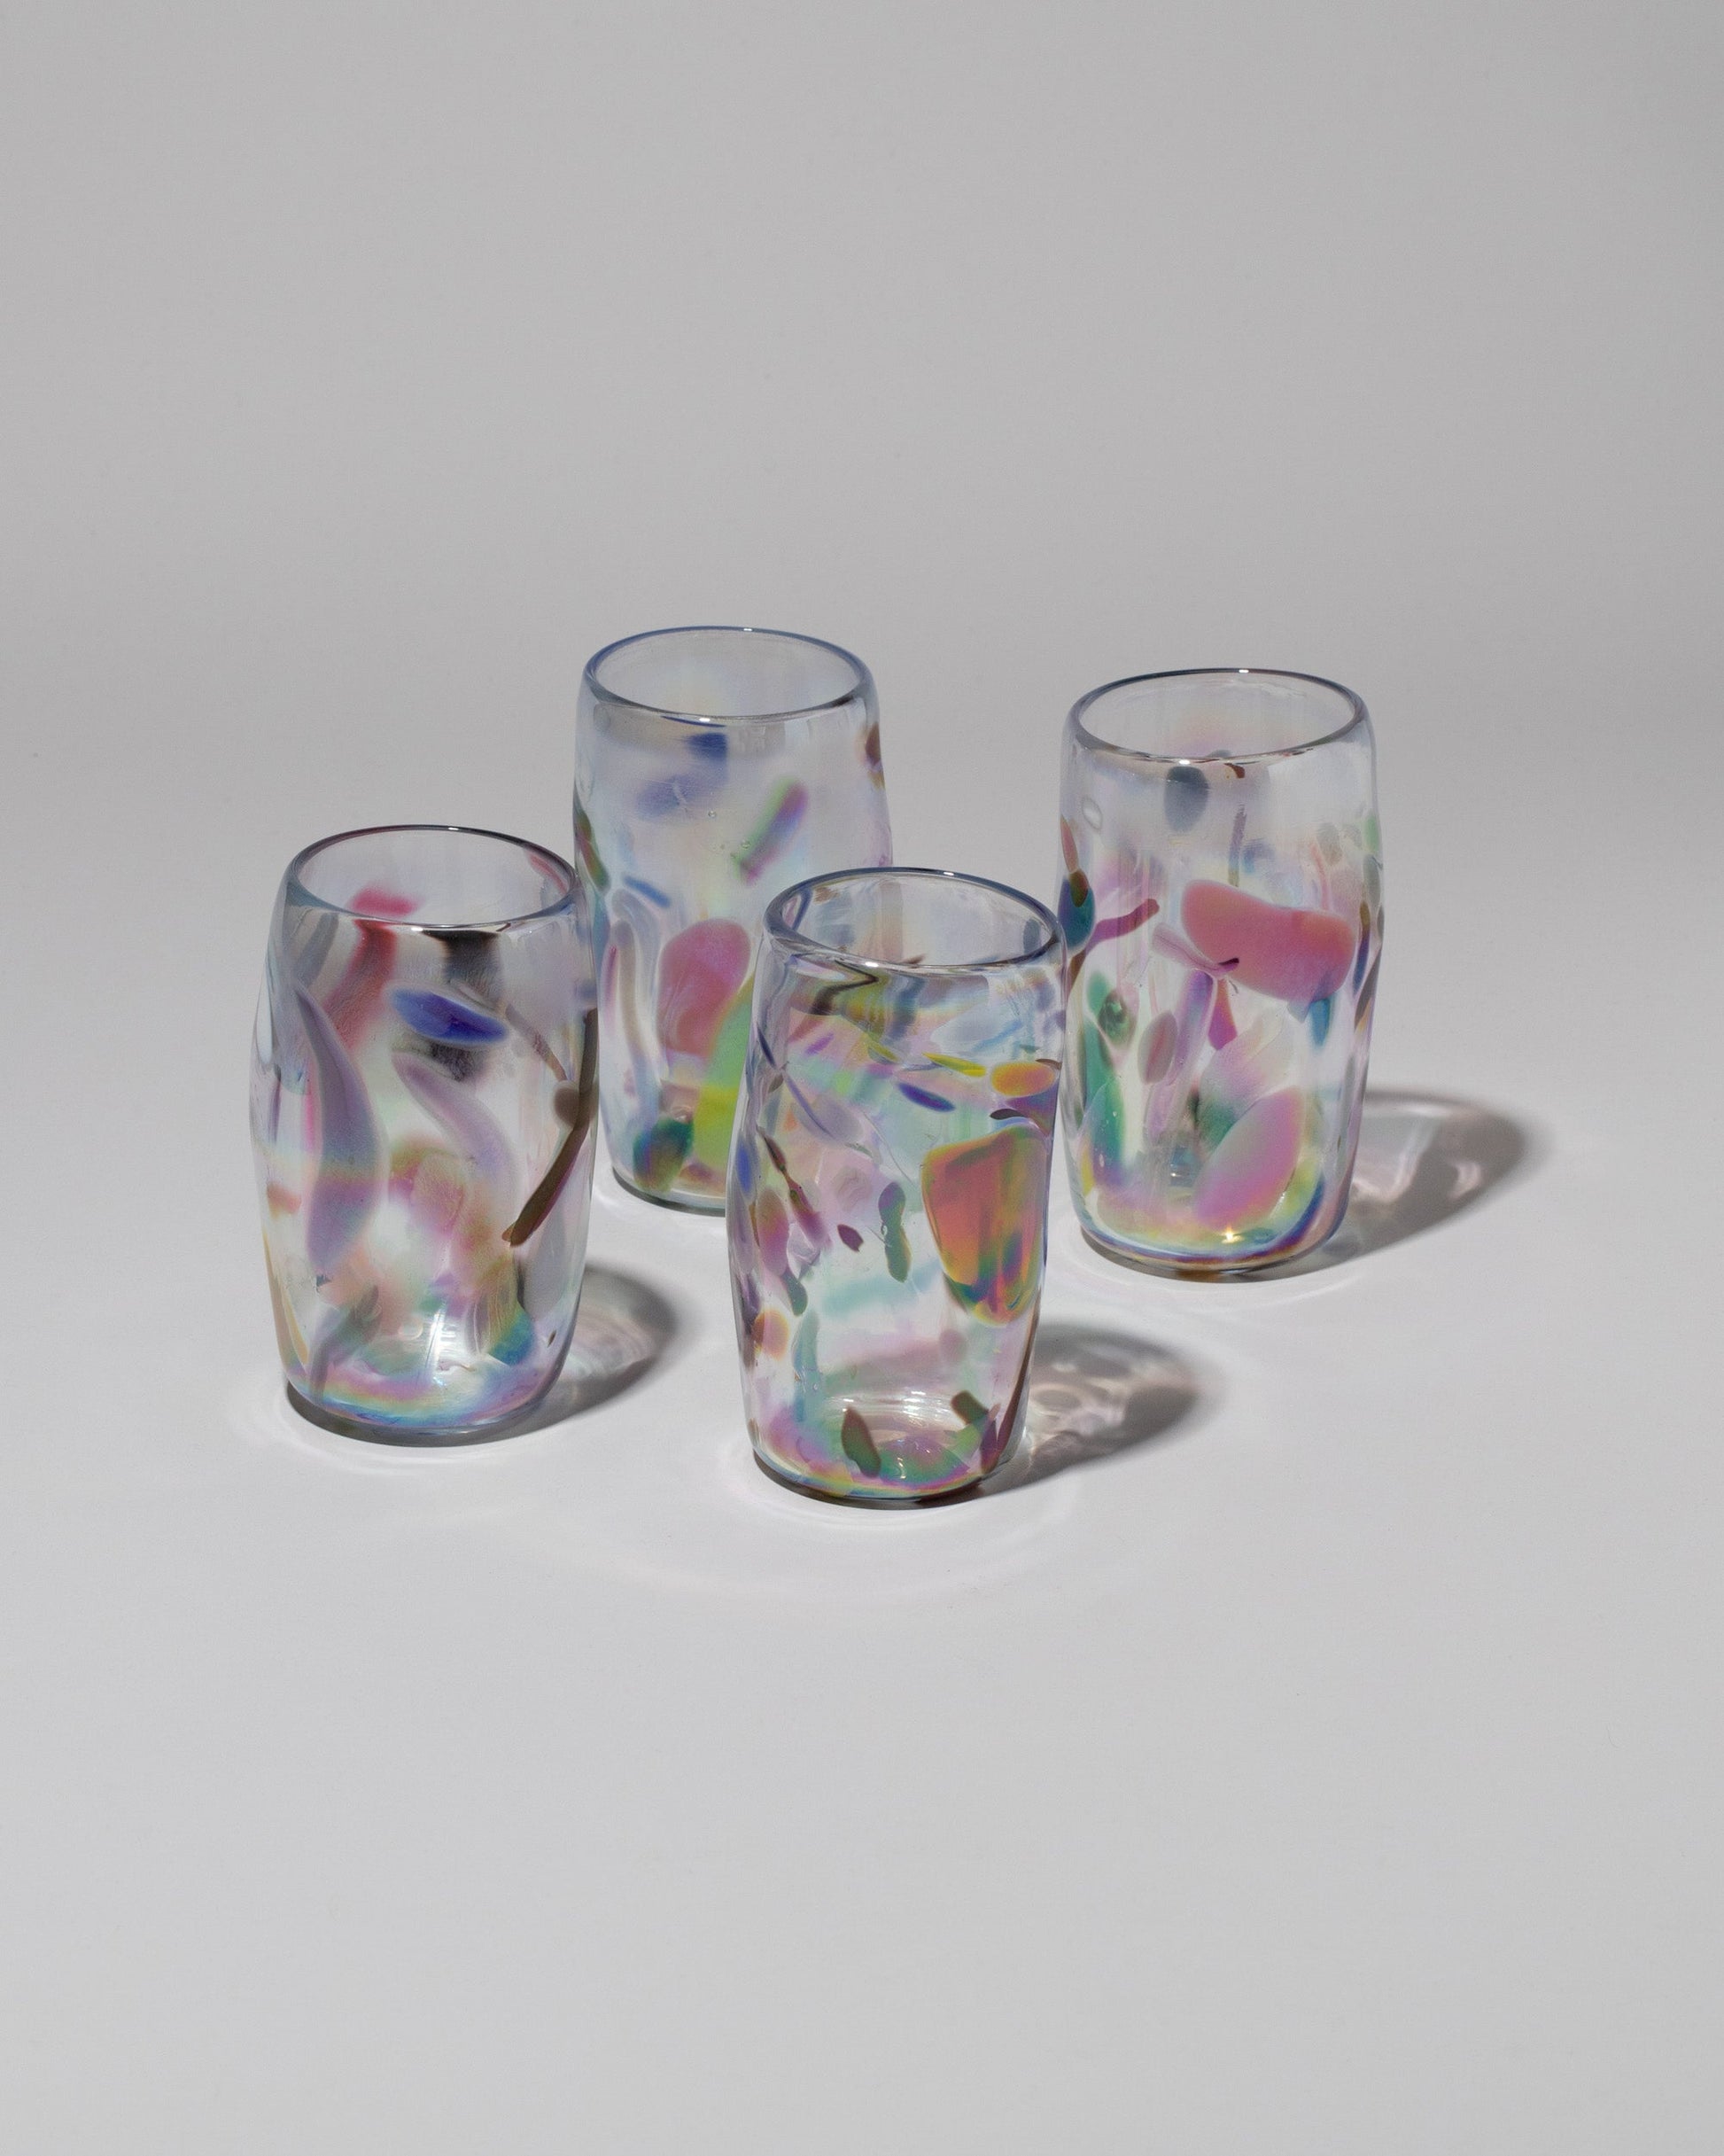 Group of Sirius Glassworks Iridescent Nassau Tumblers on light color background.